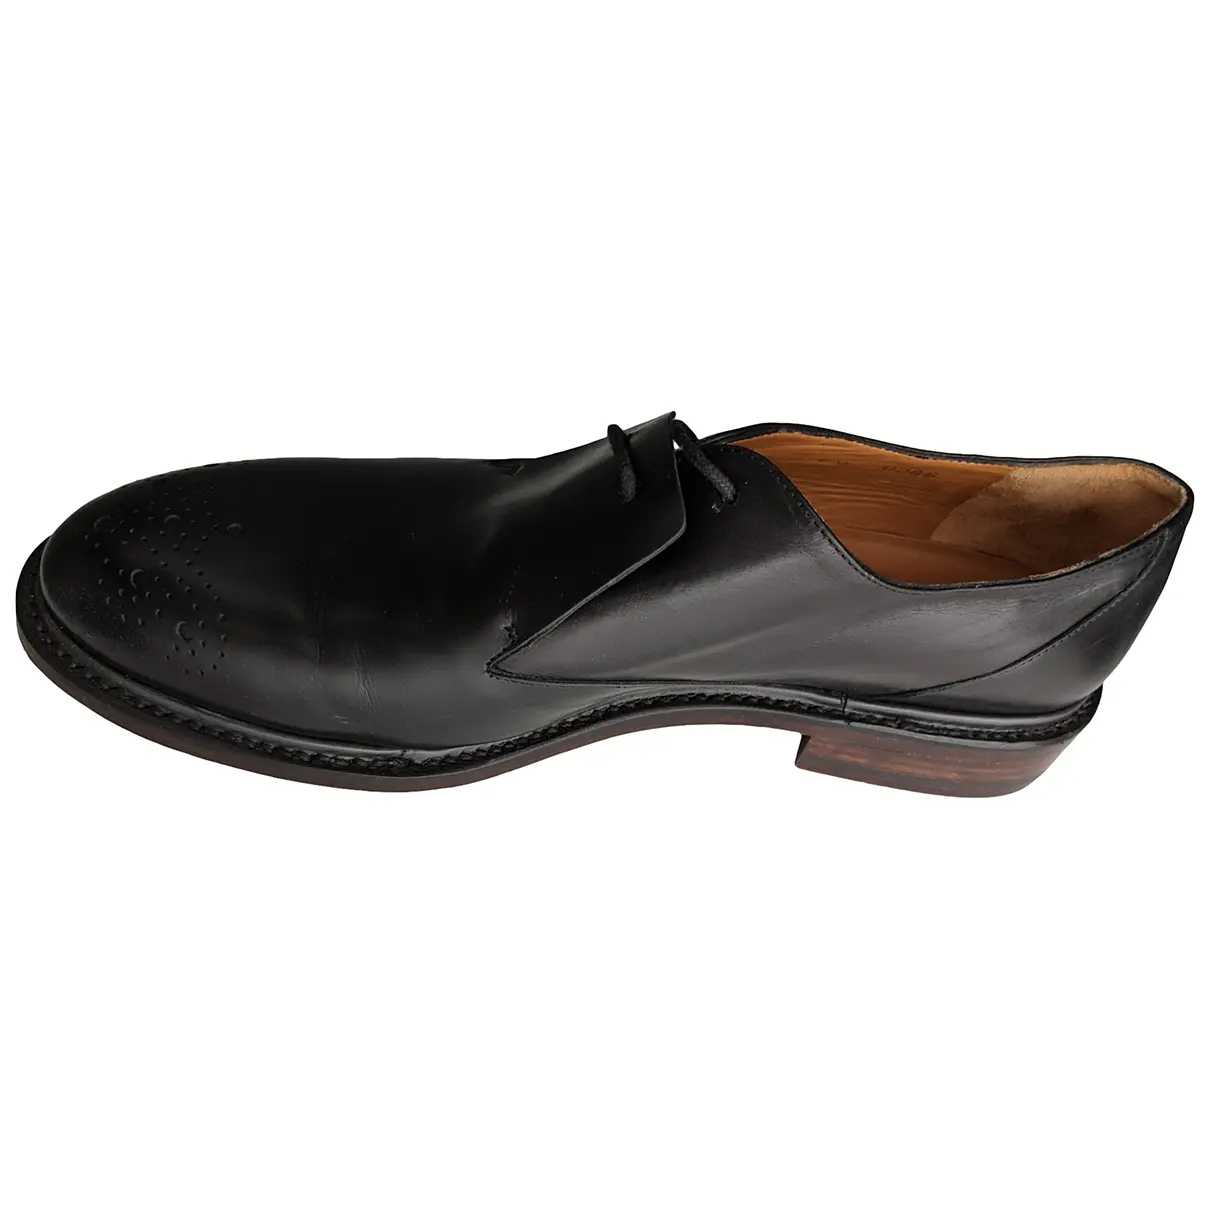 Leather flats Robert Clergerie